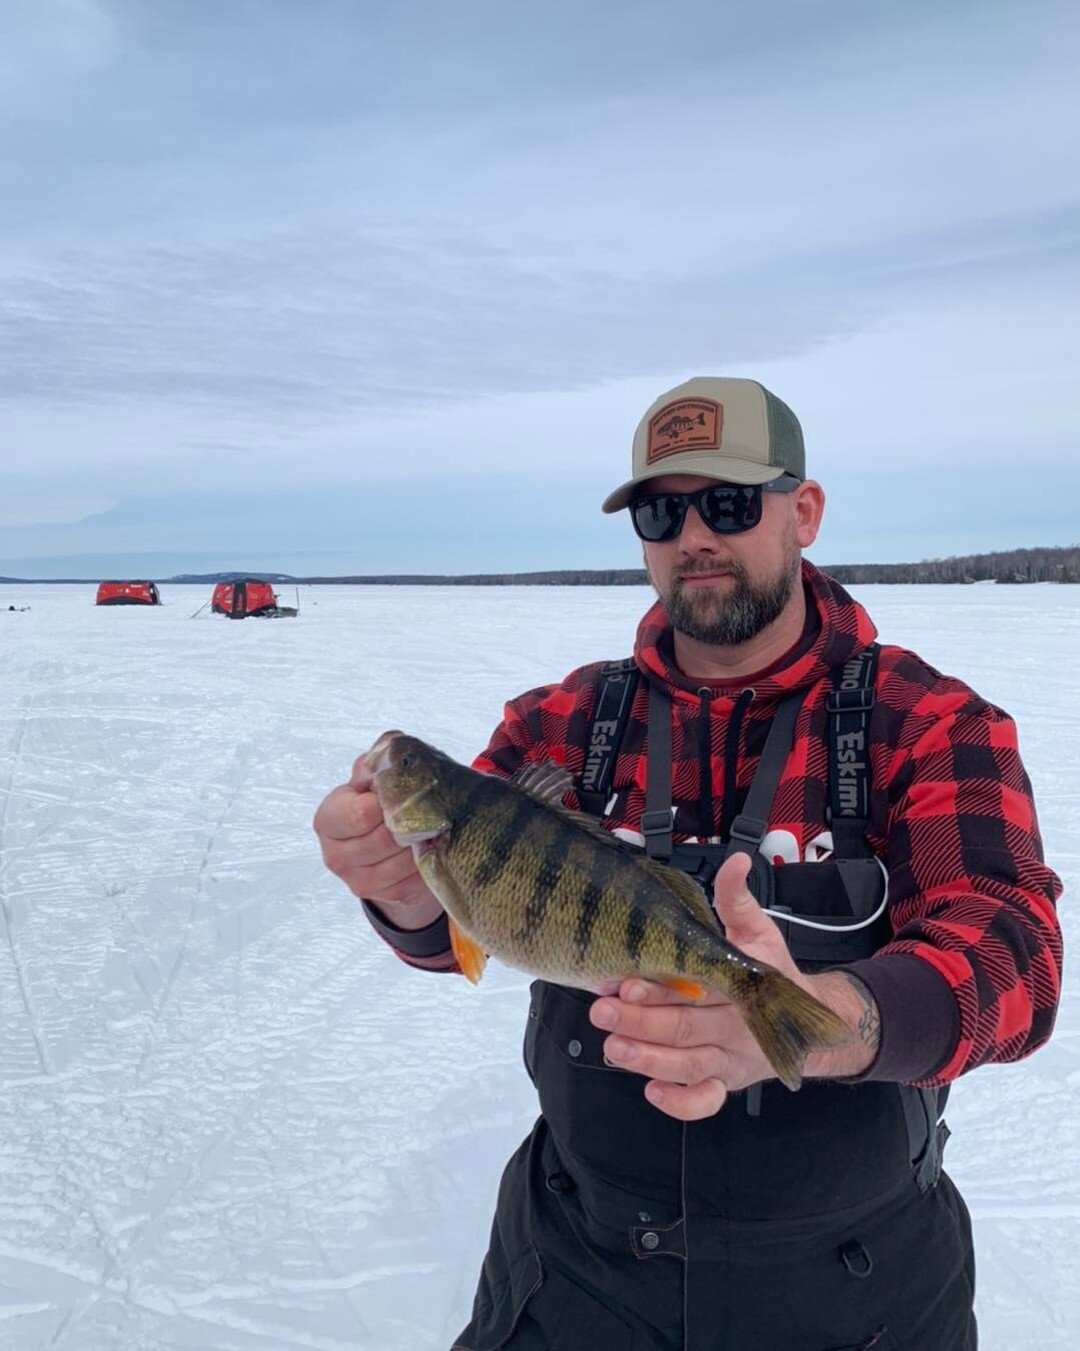 Great day to be out on the ice on Lake Gogebic!!
https://www.explorewesternup.com/outdoor-recreation/ice-fishing/. 
#icefishingnation #icefishinglife #icefishing #lakegogebic